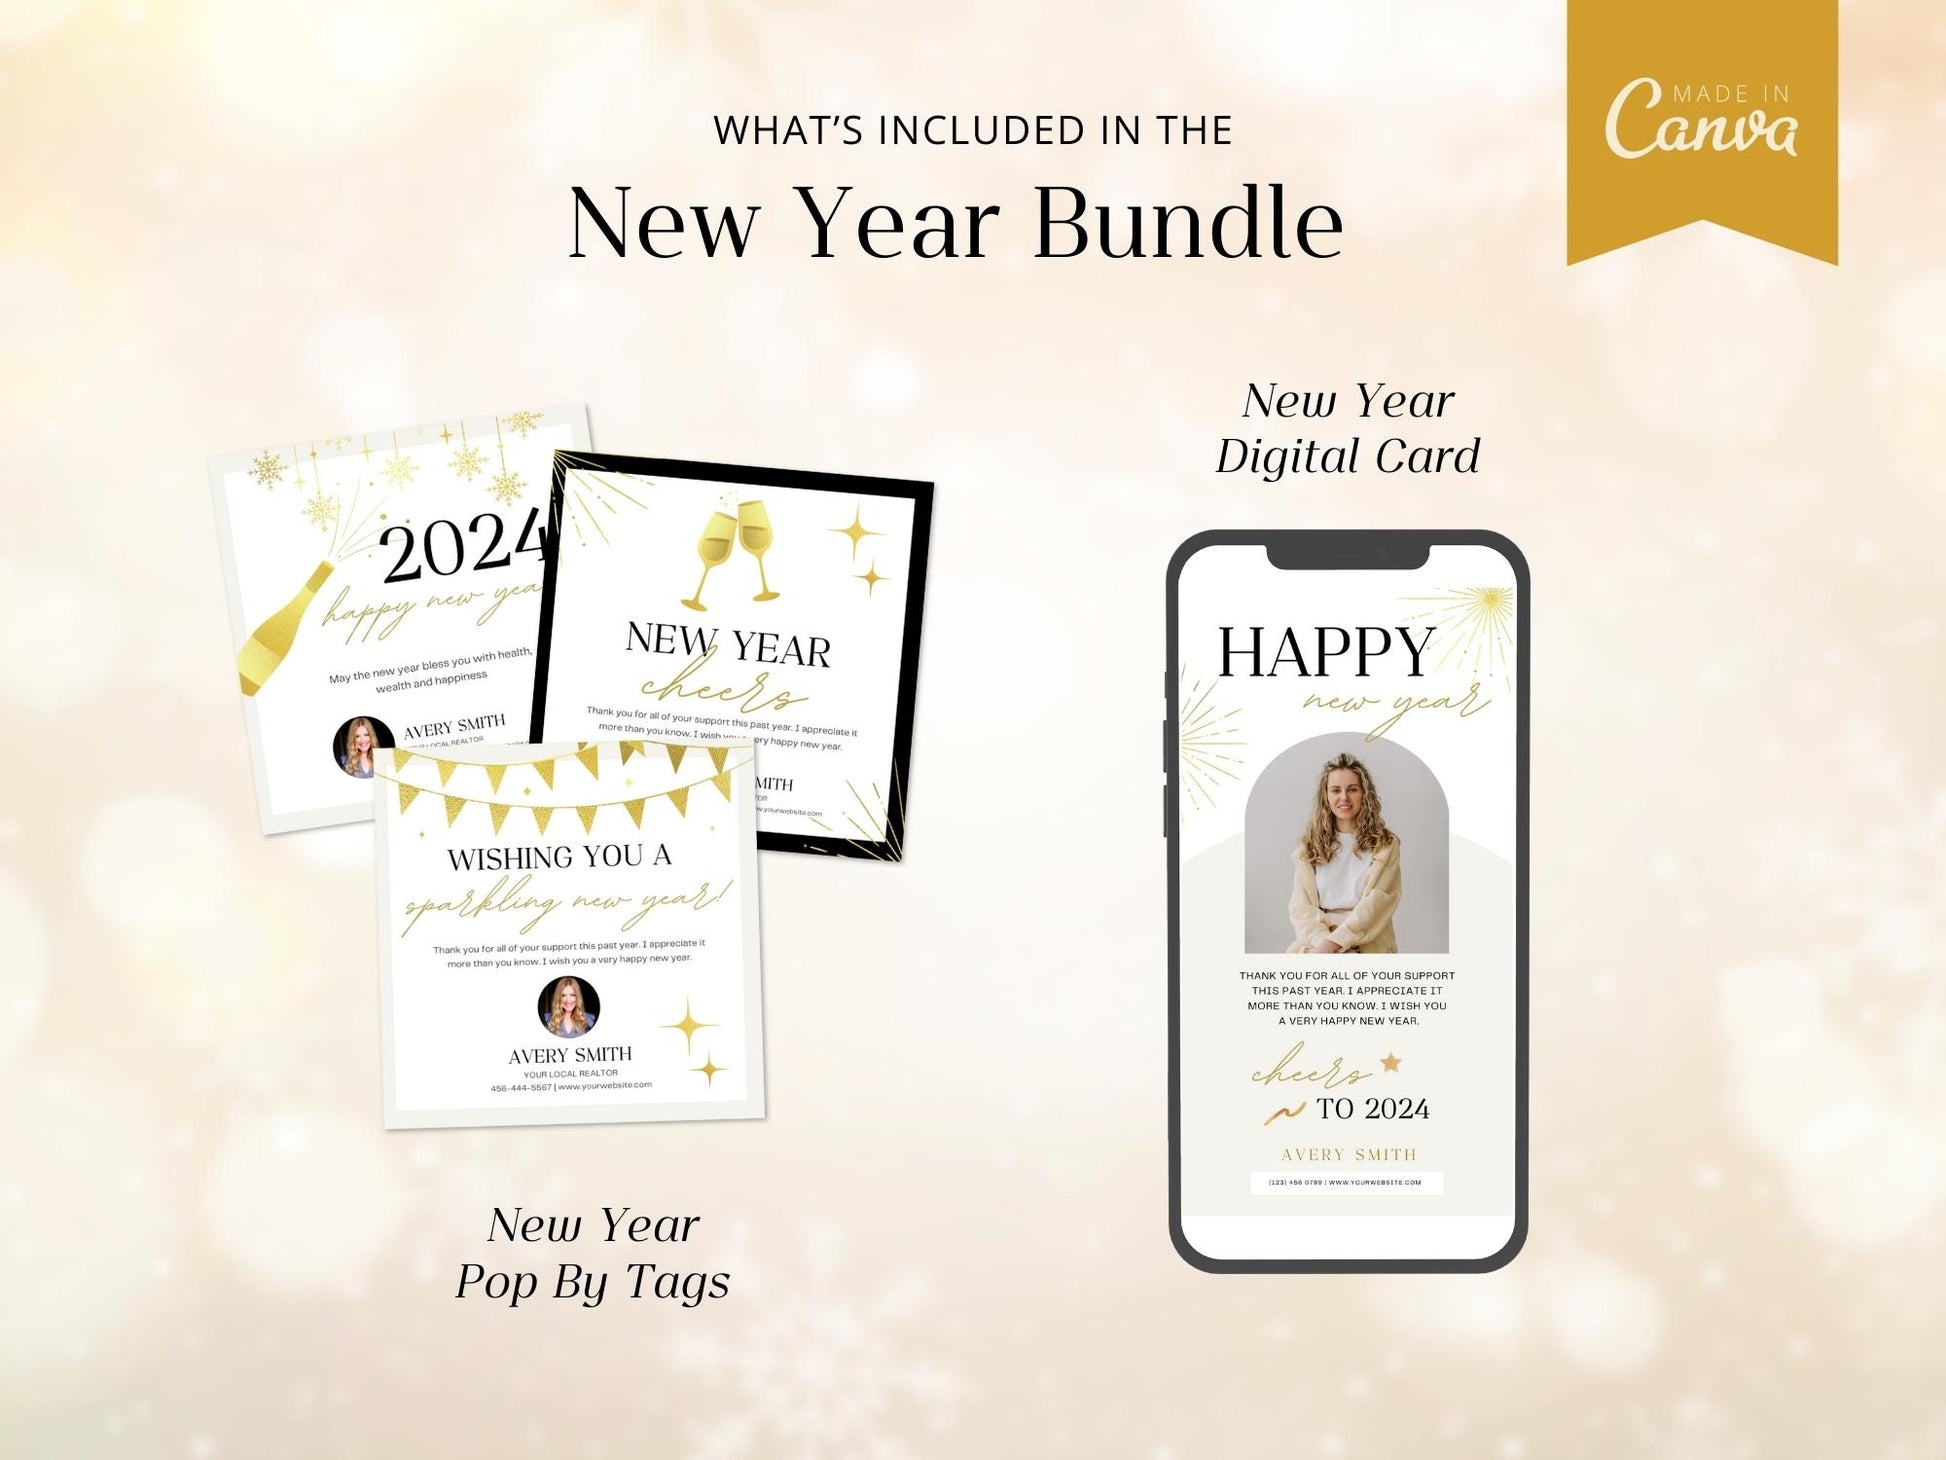 Real Estate New Year Bundle: Elevate Your Marketing with Professional Templates for a Memorable New Year Connection.